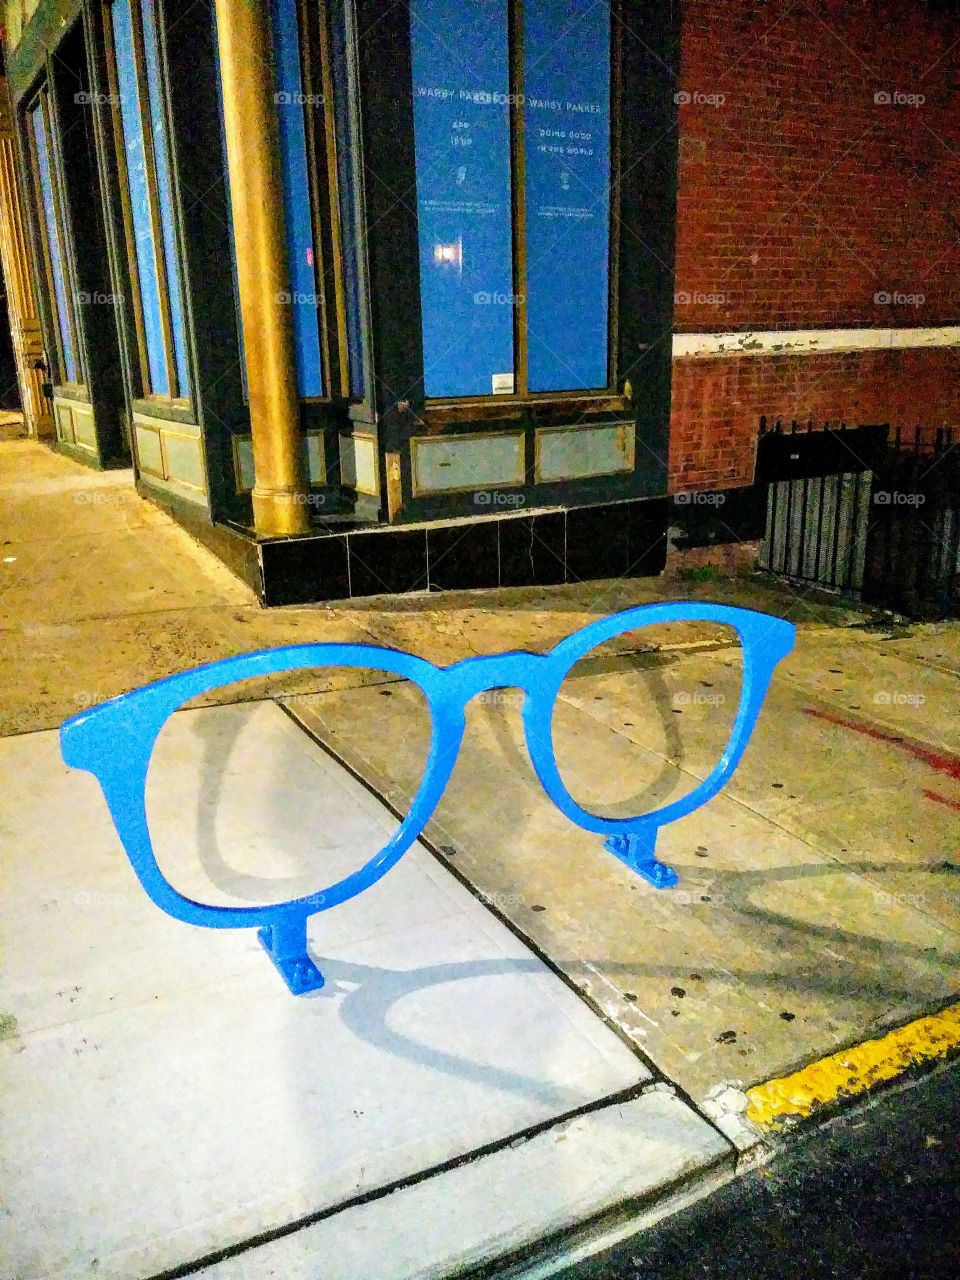 Giant eyeglass frames as a bicycle tie up.